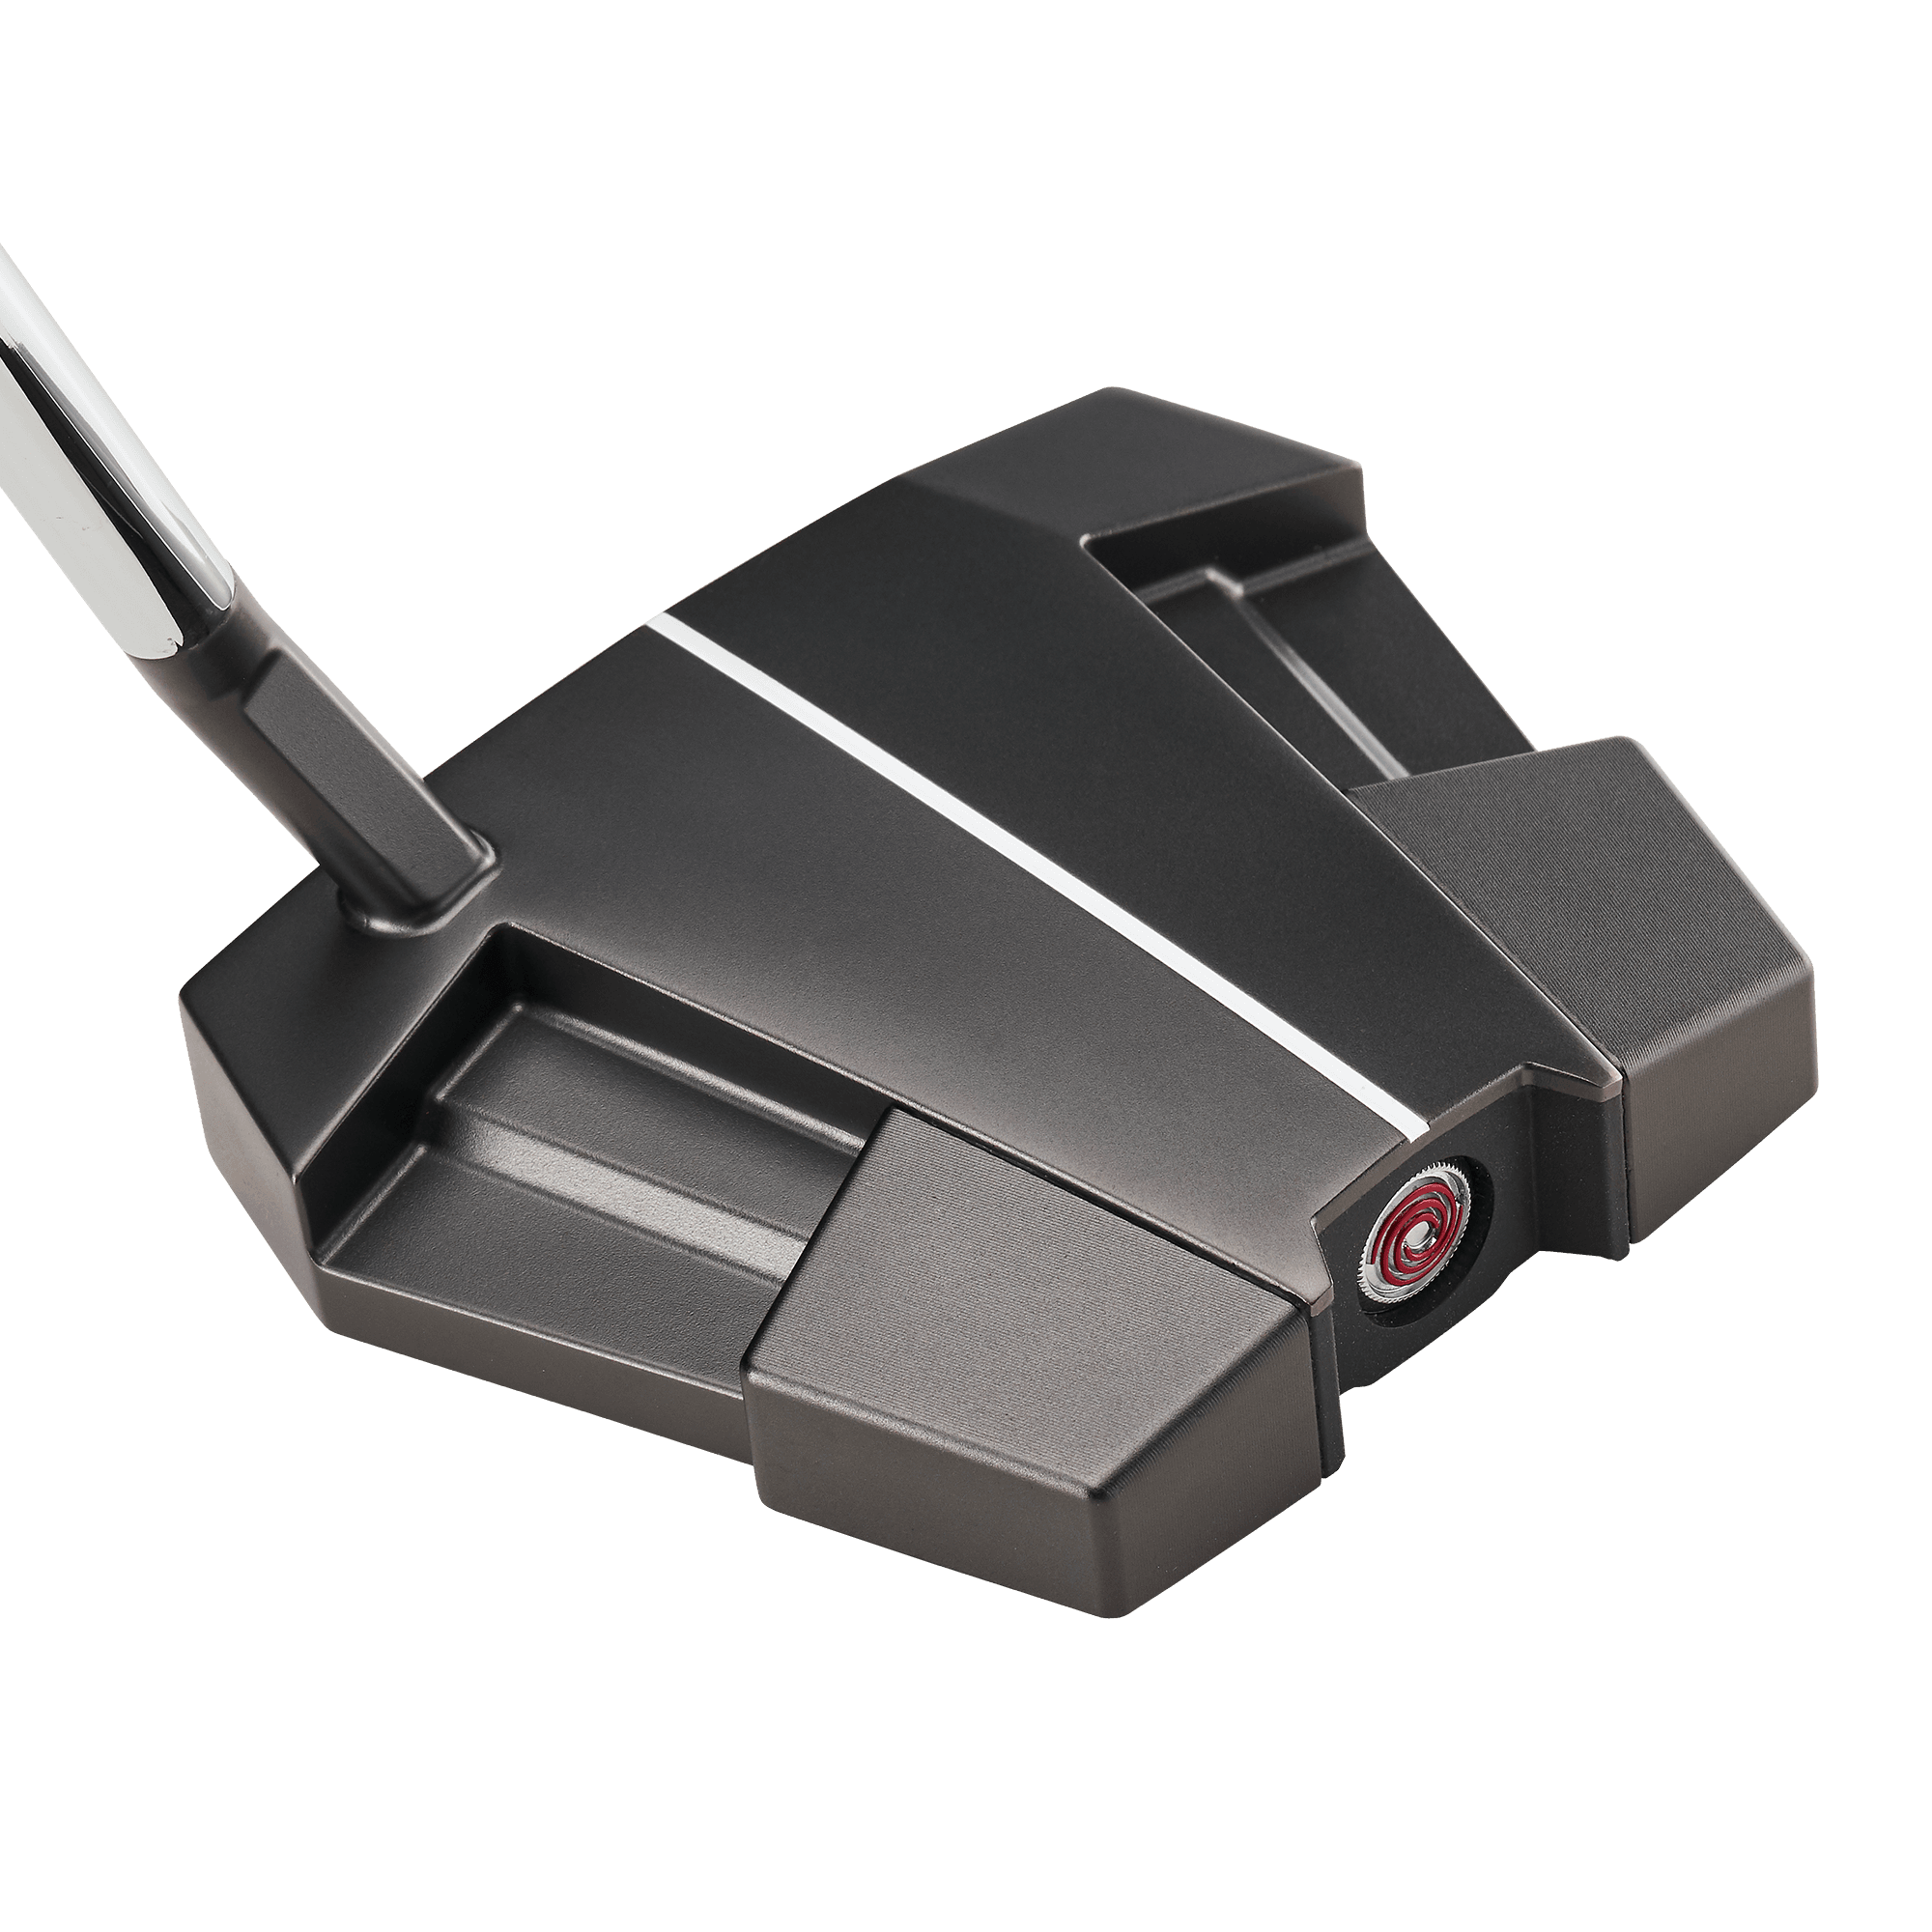 Odyssey Eleven Tour Lined S Putter | Callaway Golf Pre-Owned